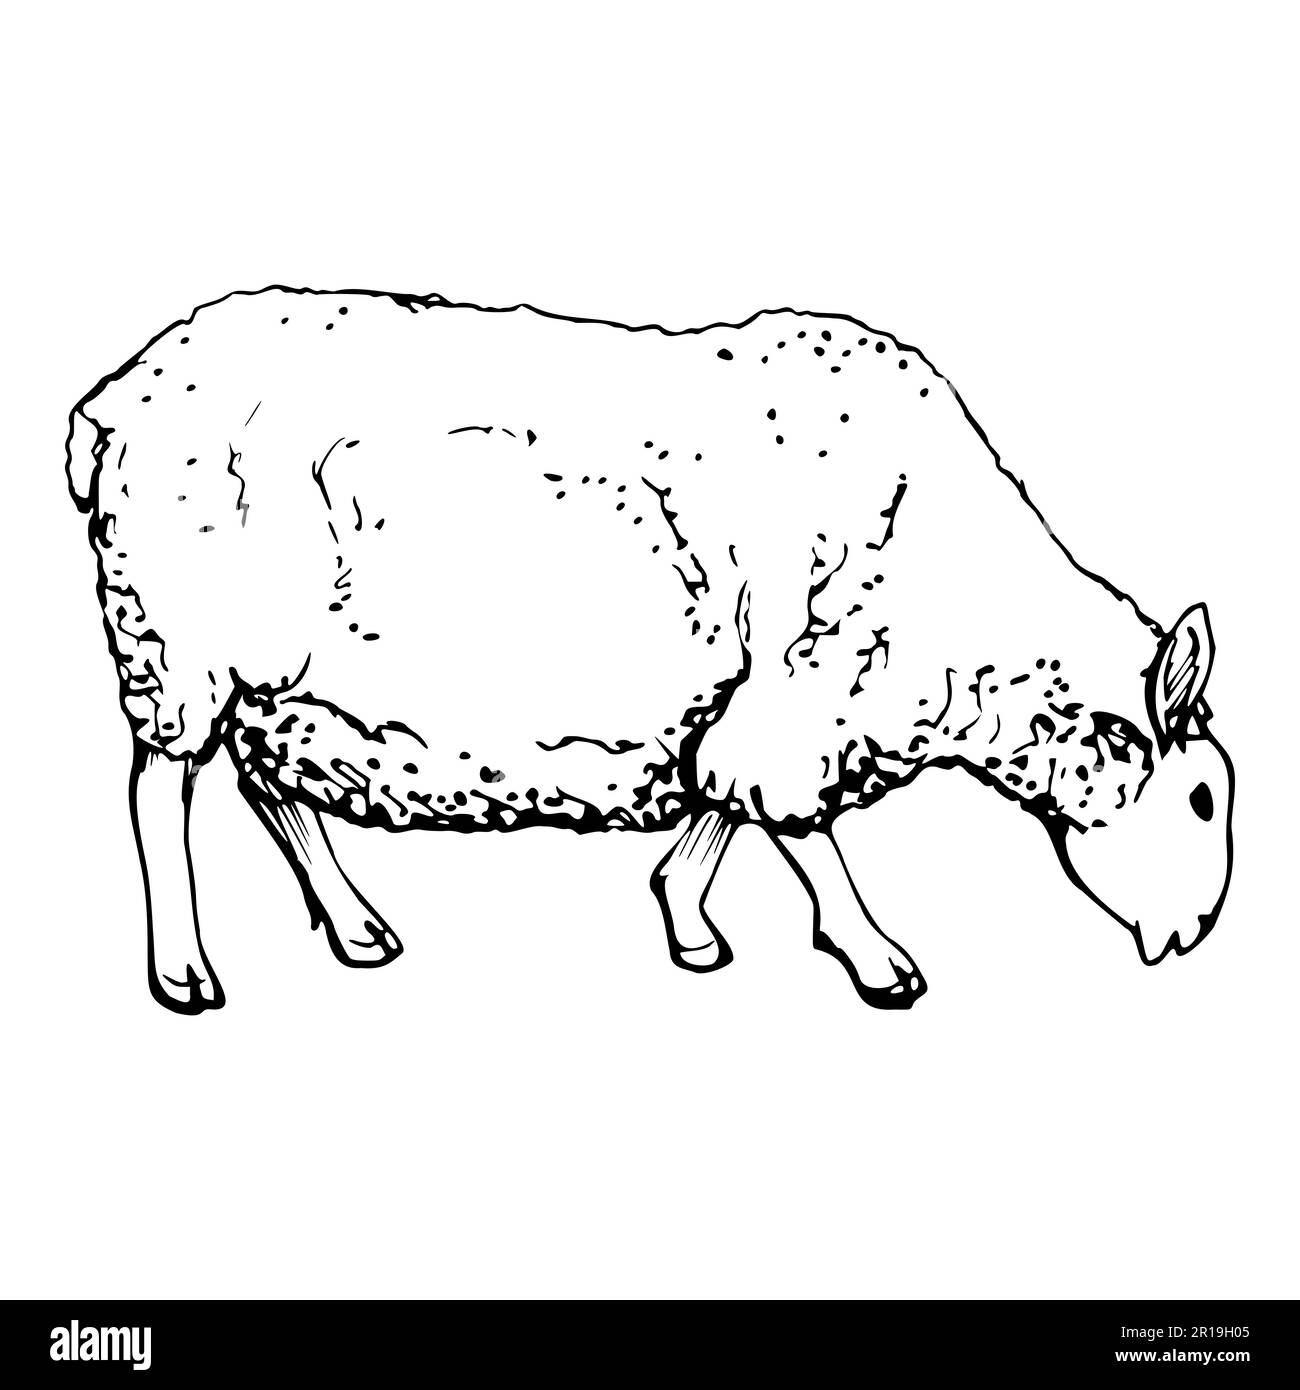 Ink hand drawn sketch of isolated object. Vector black silhouette of grazing domestic animal sheep livestock for wool. Design for tourism, travel Stock Vector